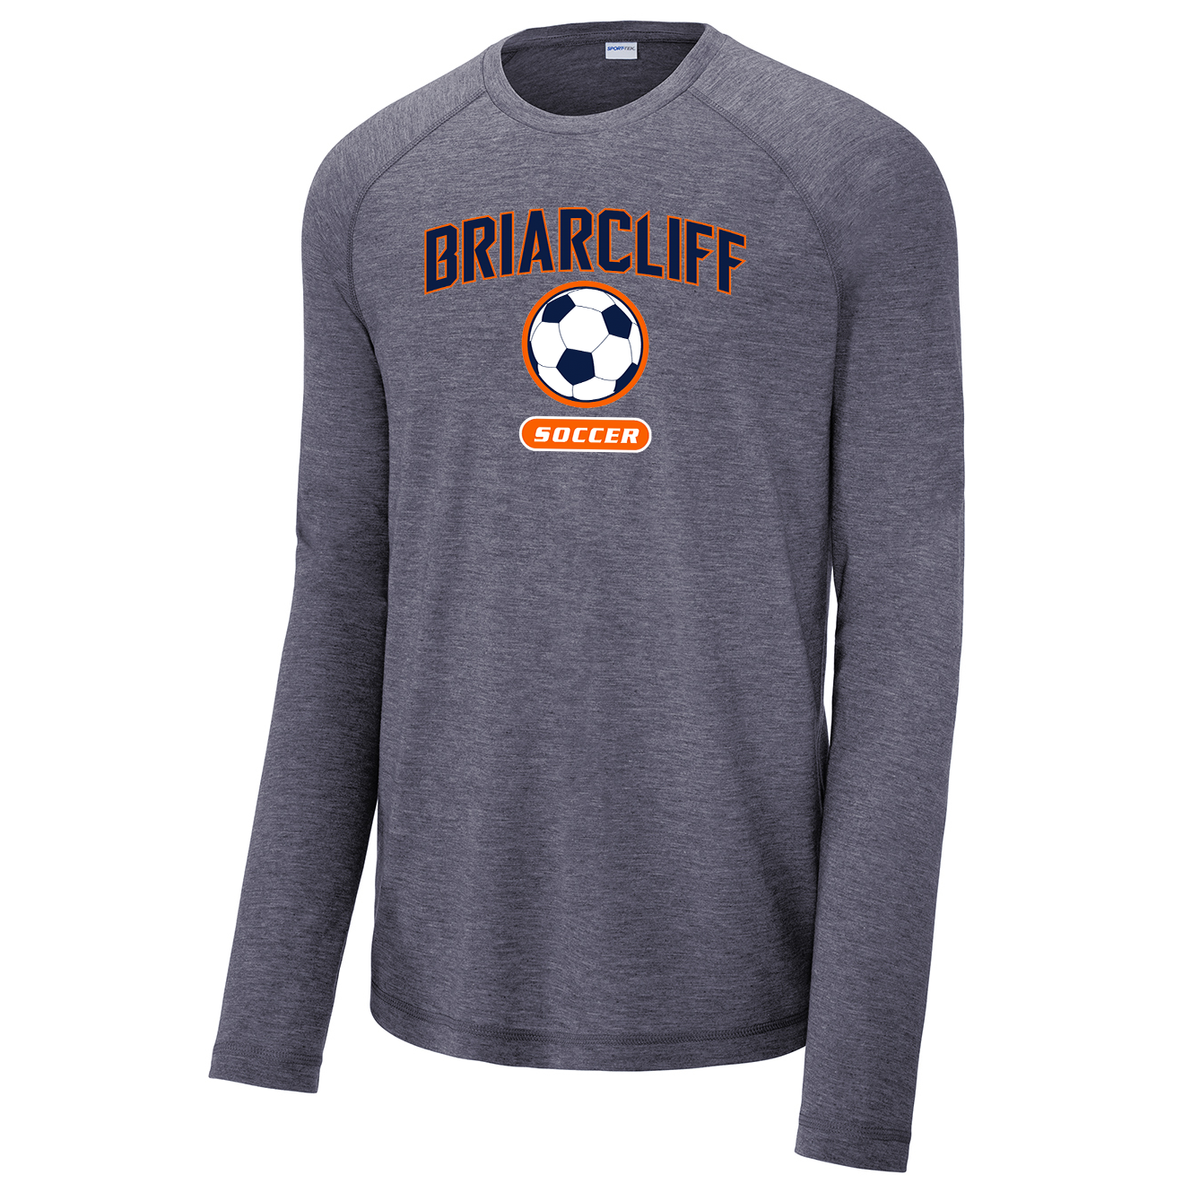 Briarcliff Soccer Long Sleeve Raglan CottonTouch